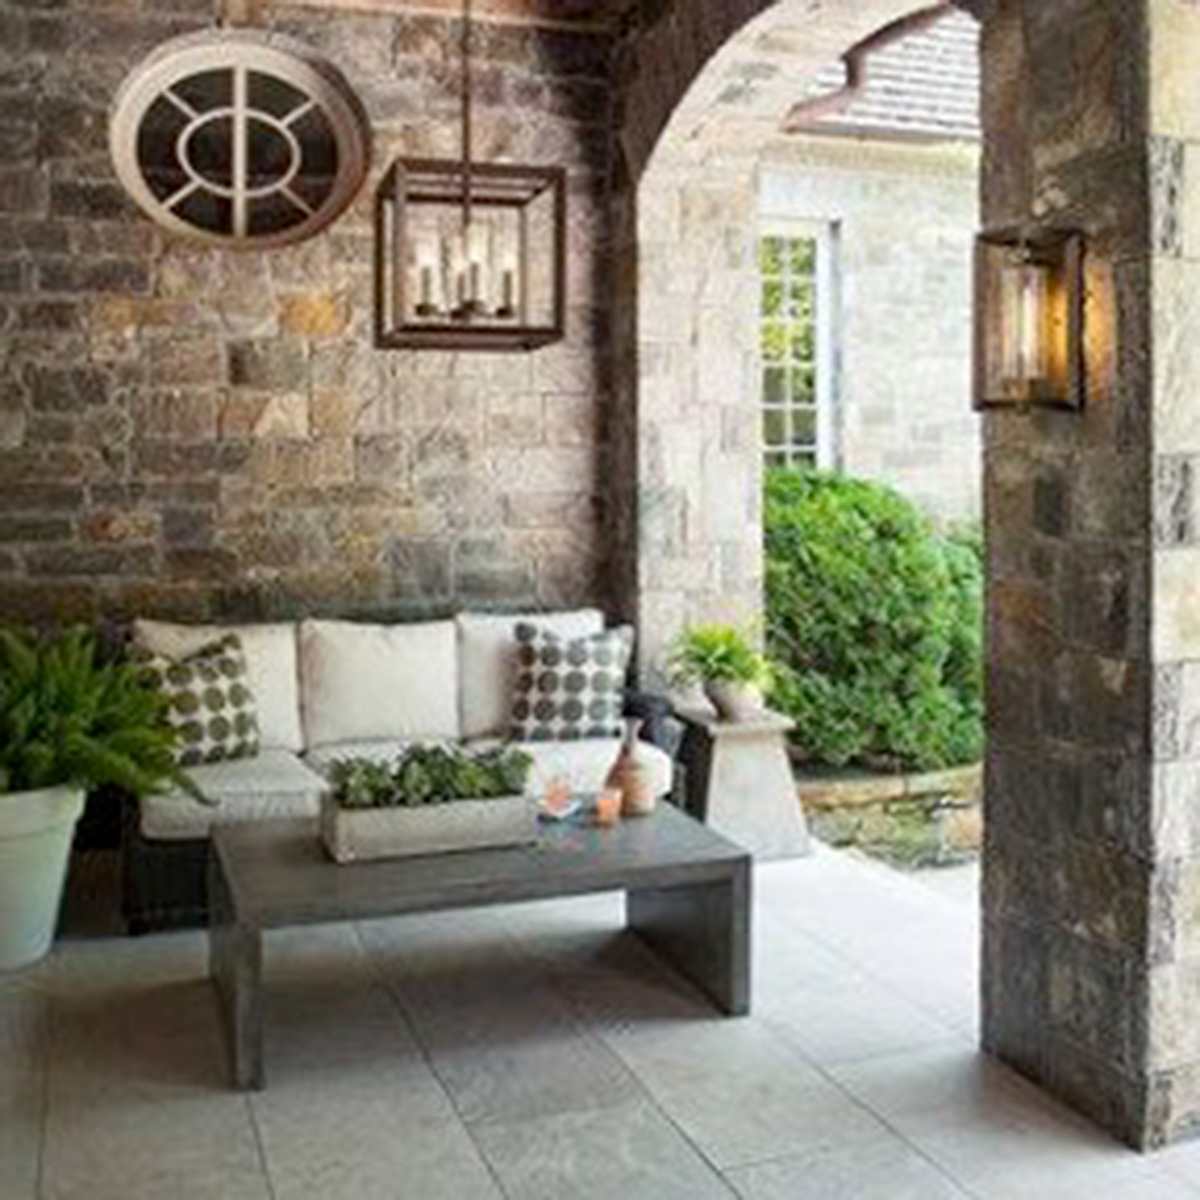 5 ideas for outdoor lighting